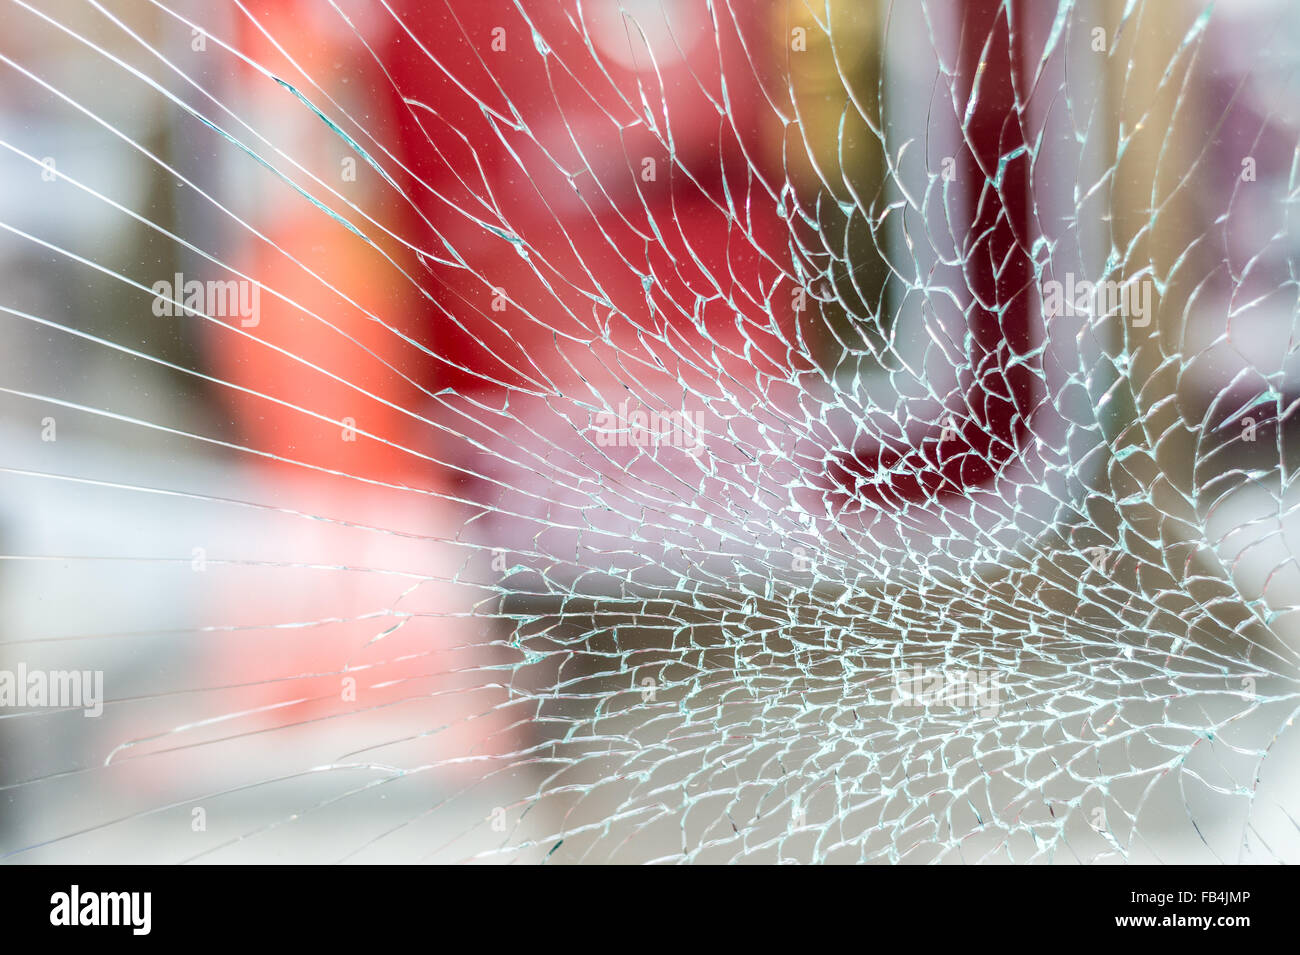 Cracked Shop Window Glass looking like a spider web, with red background Stock Photo